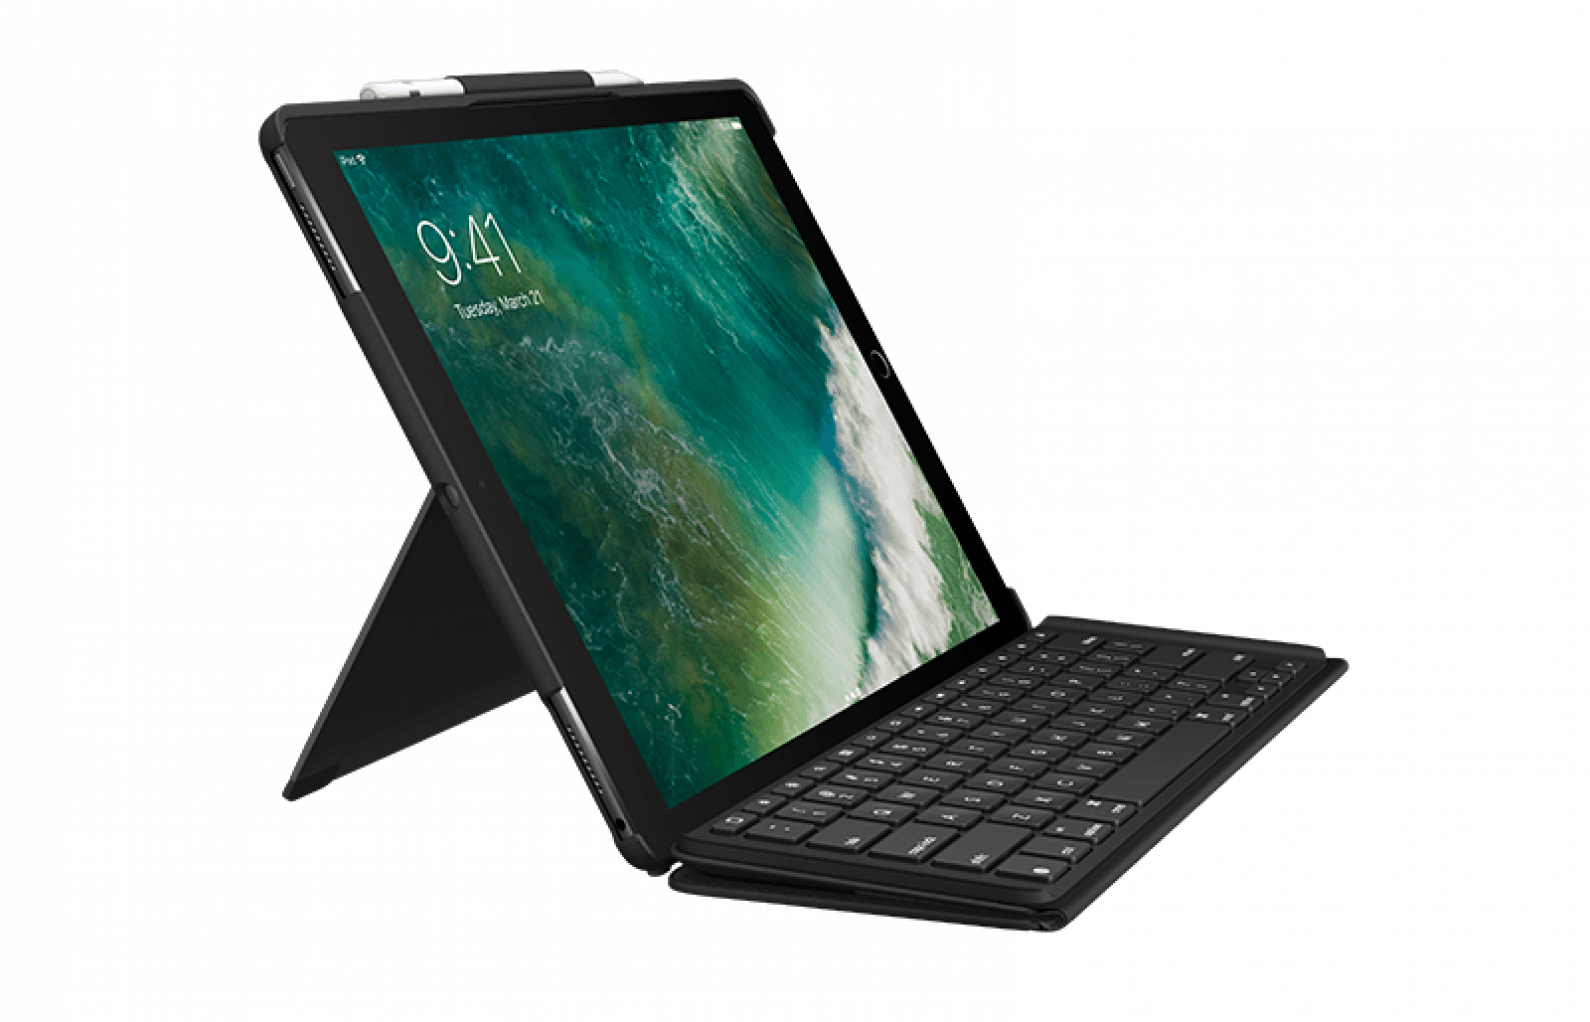 røg svinge Tom Audreath Must-Have Accessories for the New 10.5-inch iPad Pro: Keyboards, Cases &  More!